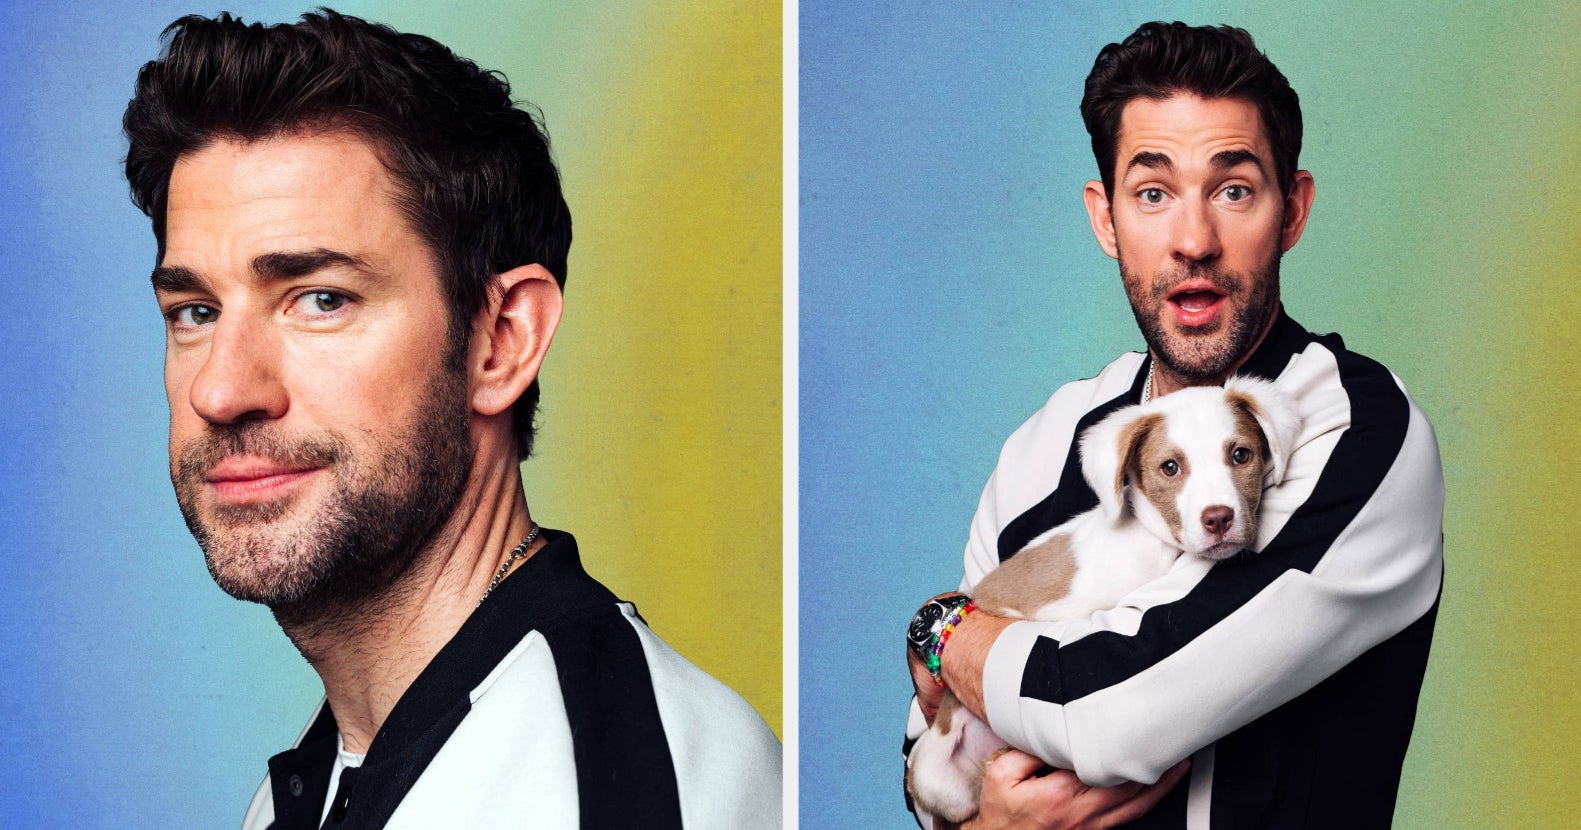 John Krasinski Just Completed Our Puppy Interview And Revealed 